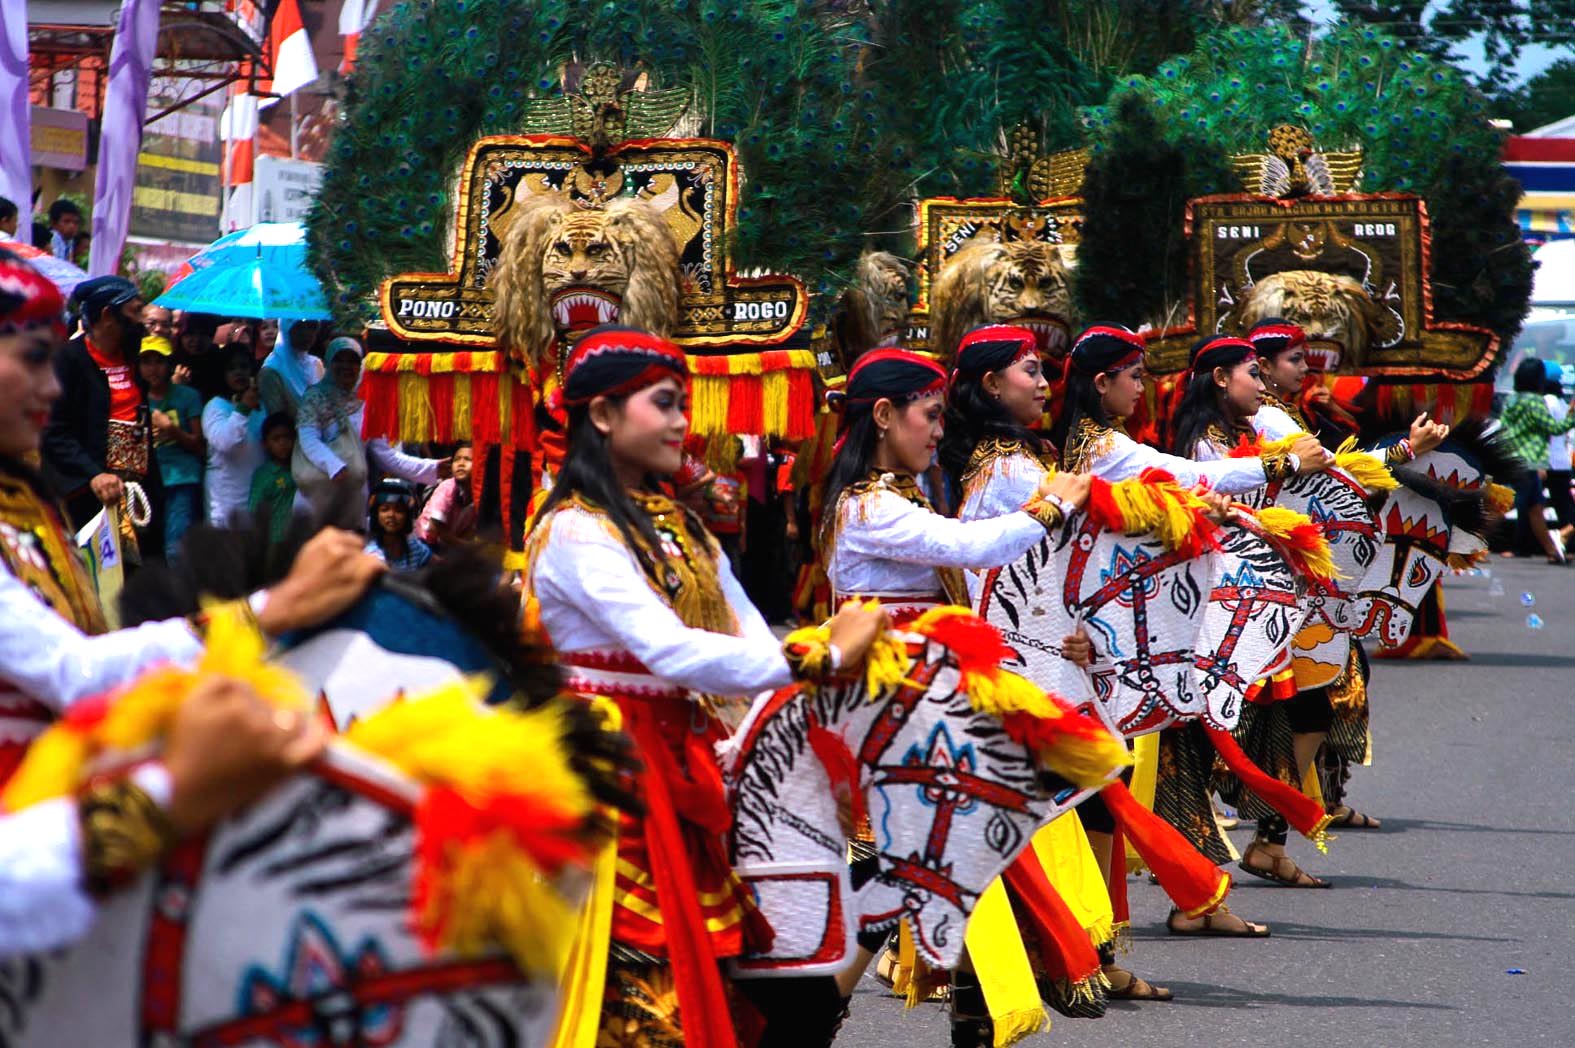 Reog Ponorogo Indonesian  Culture and Tradition Travel Guide